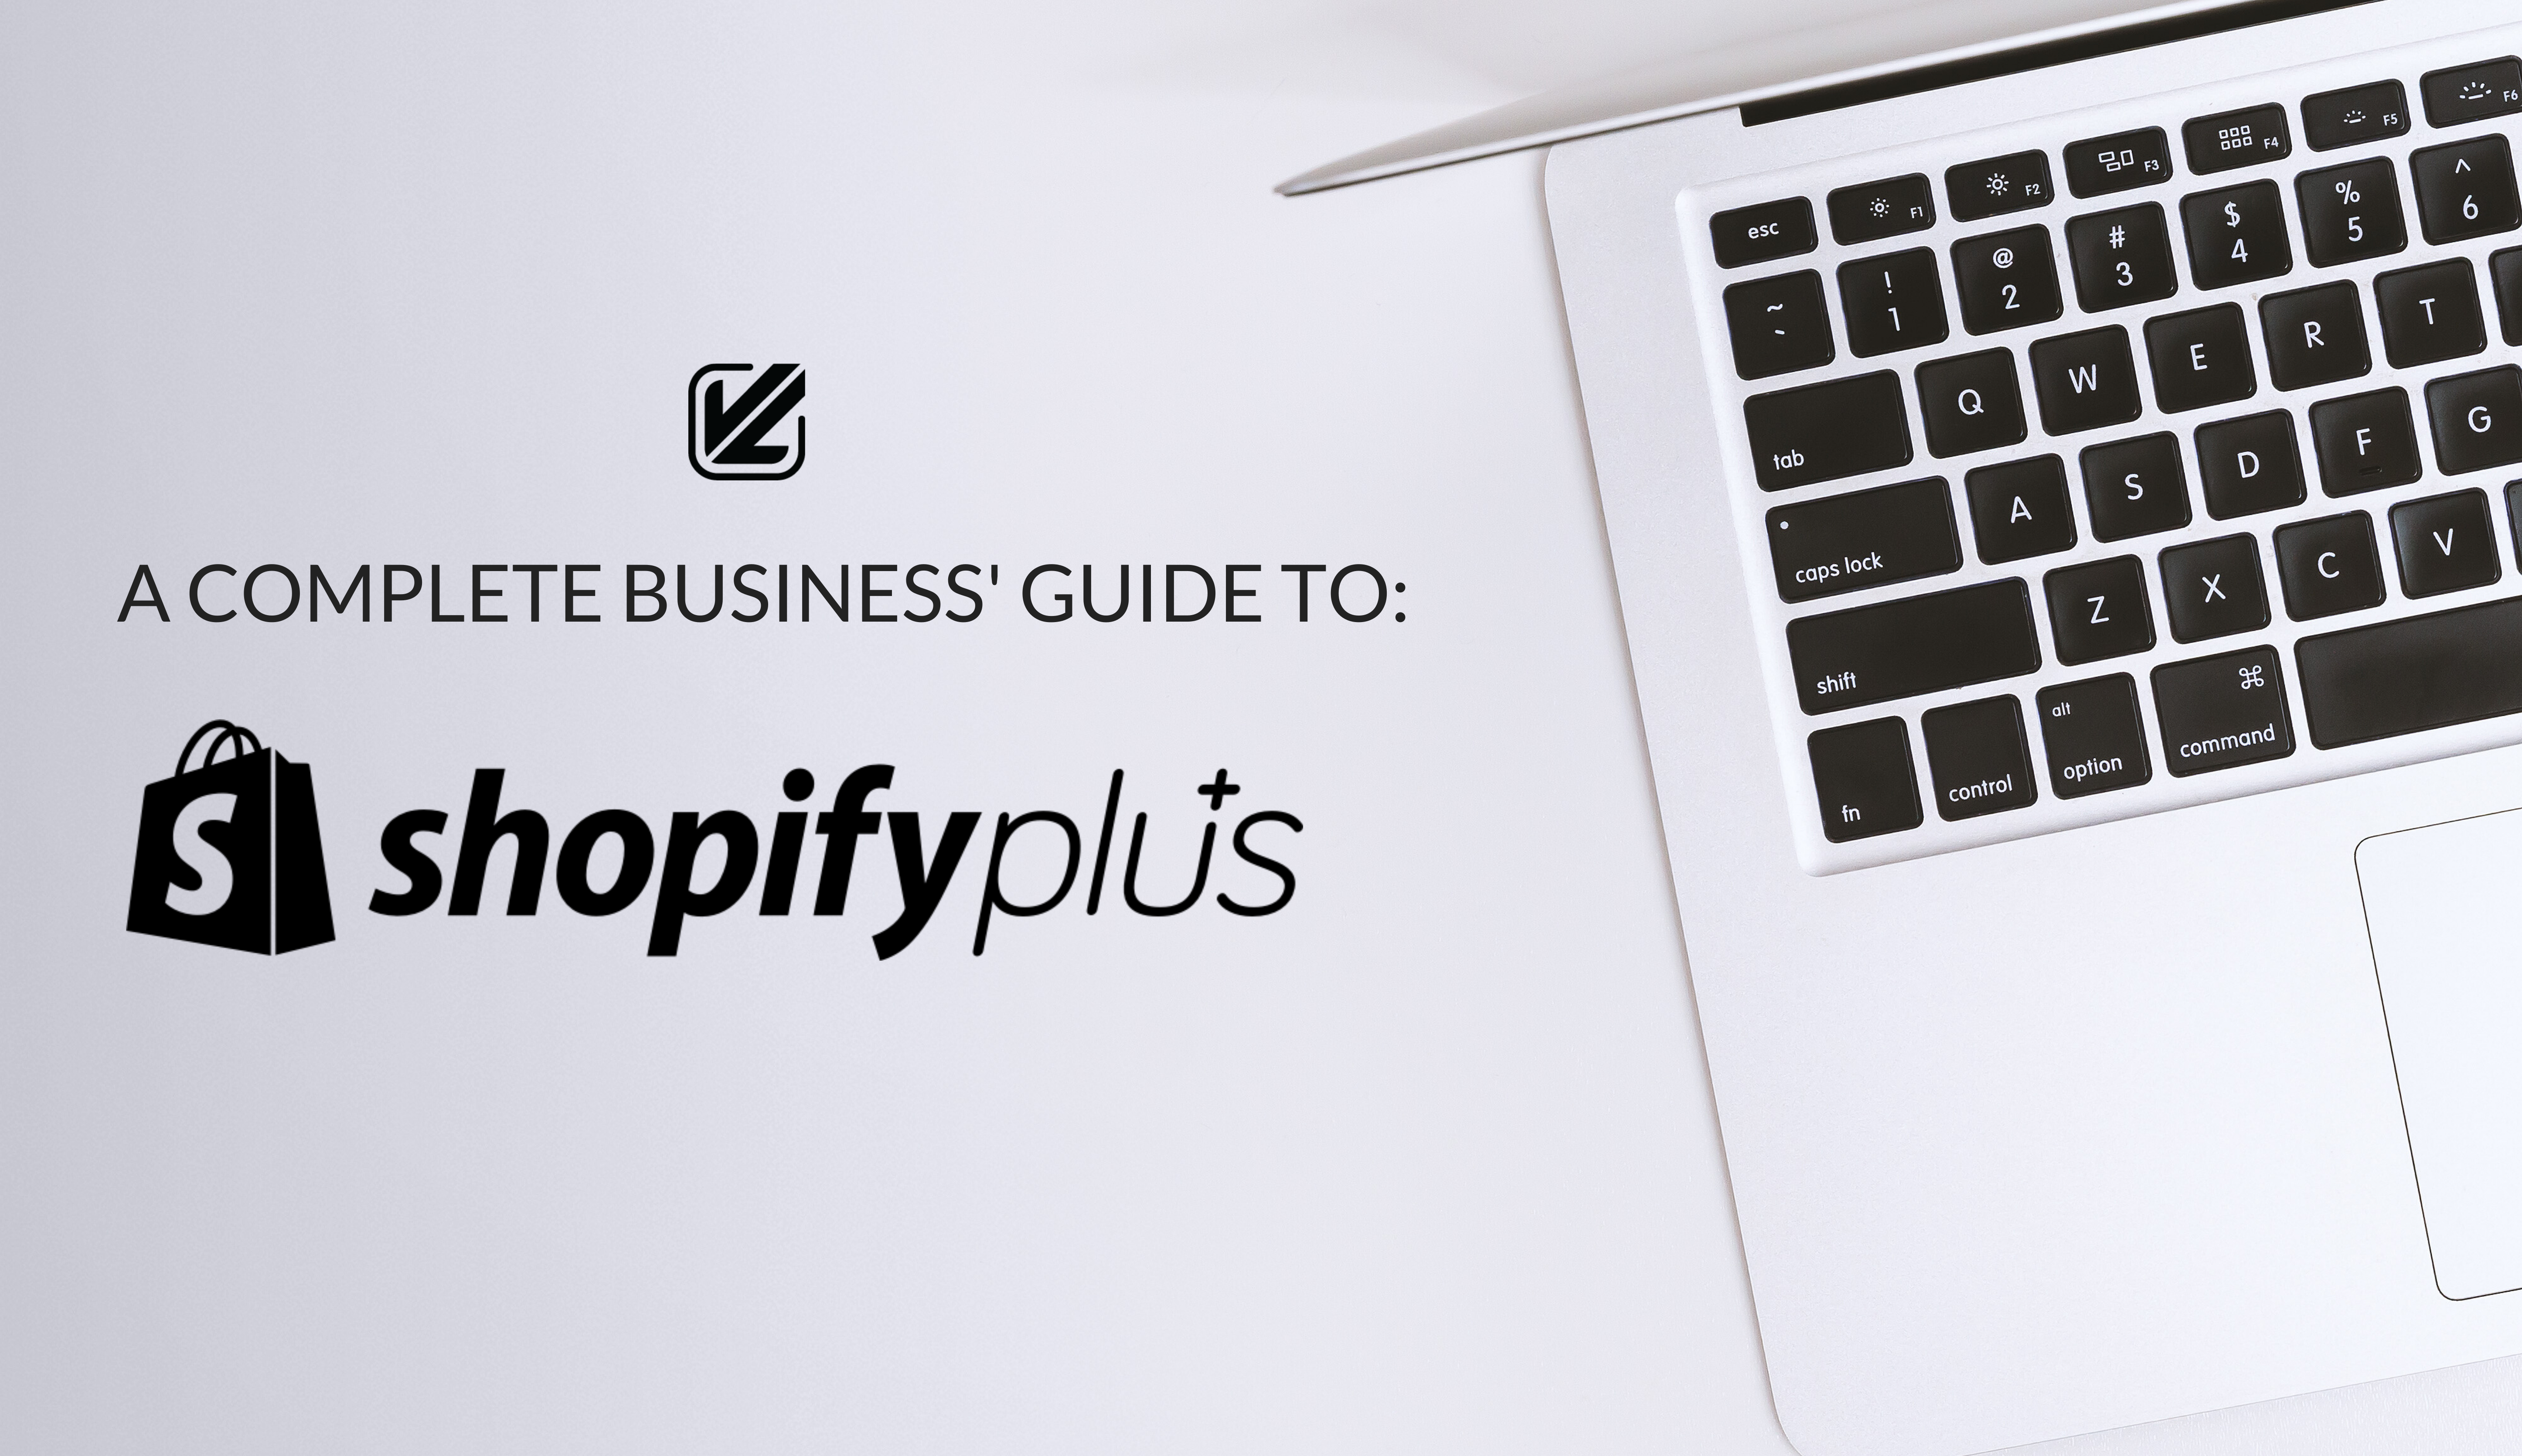 A complete business guide to Shopify Plus